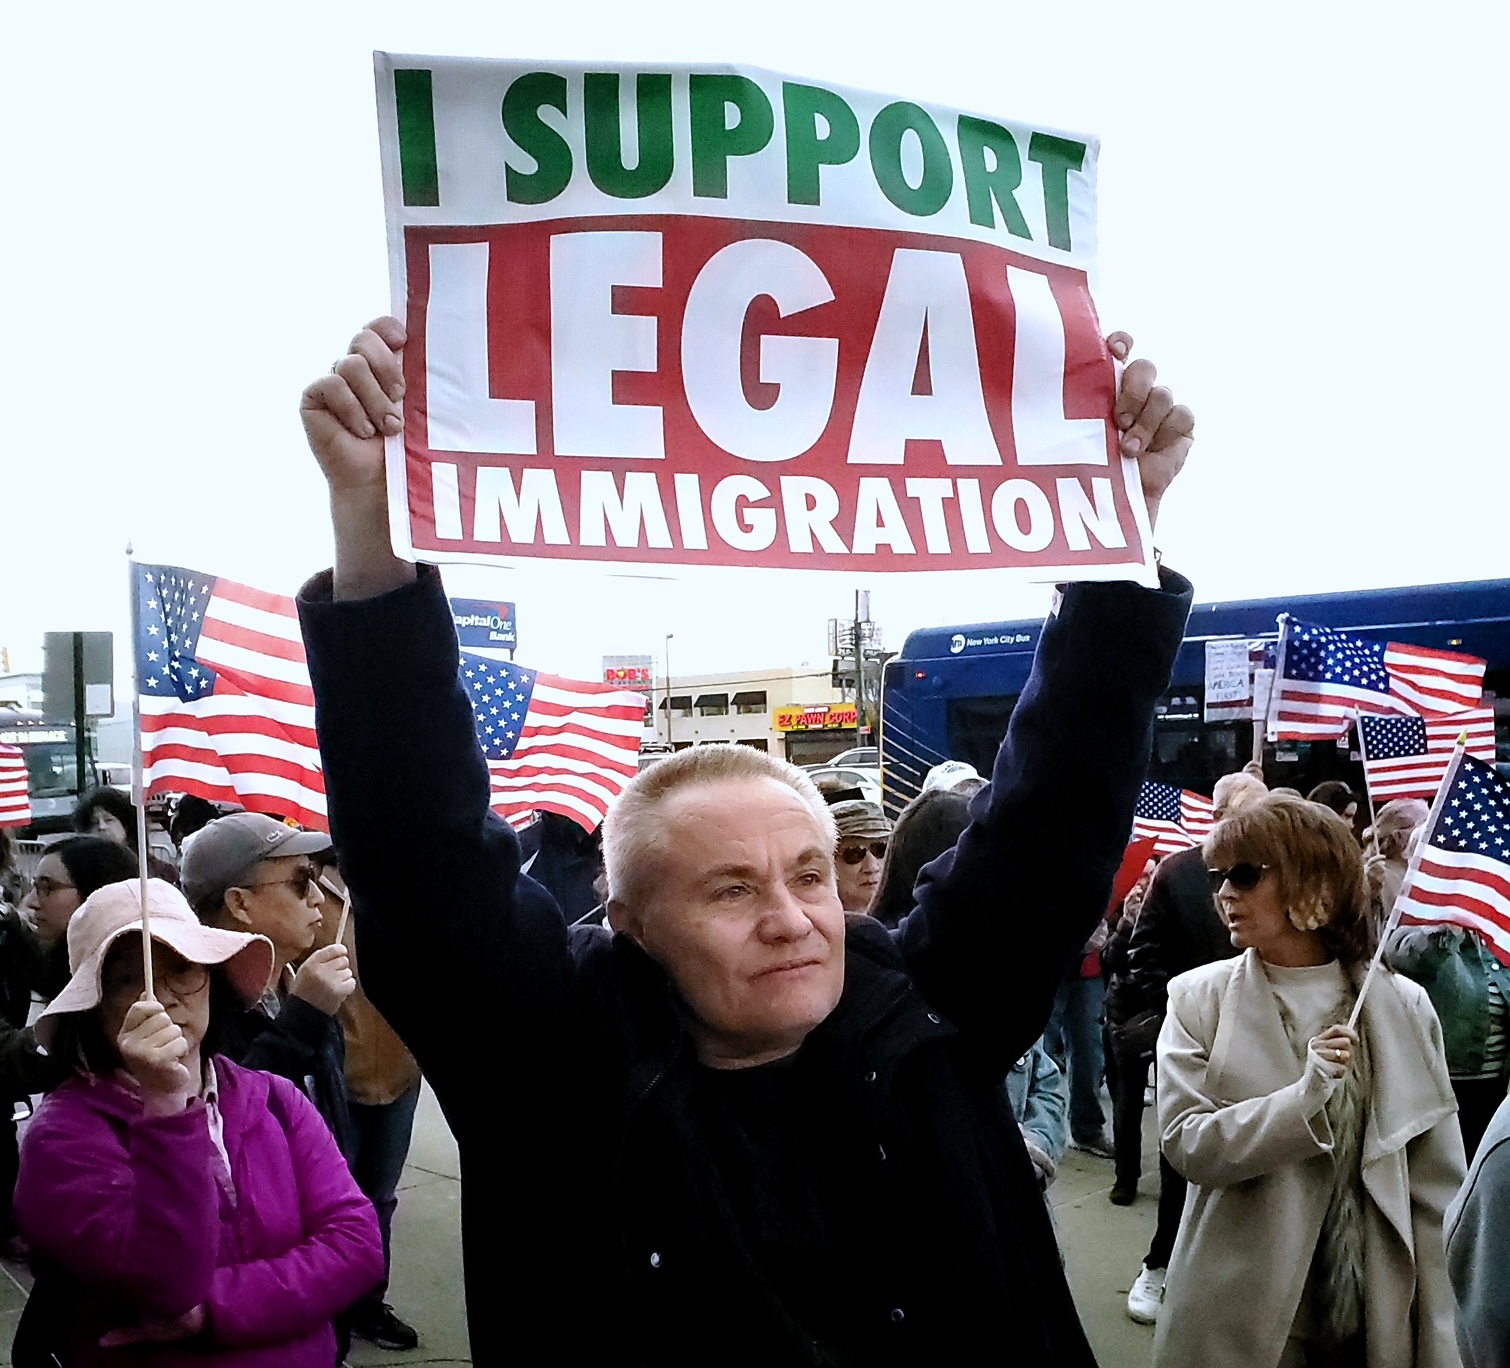 A supporter of “legal immigration” makes his presence felt.